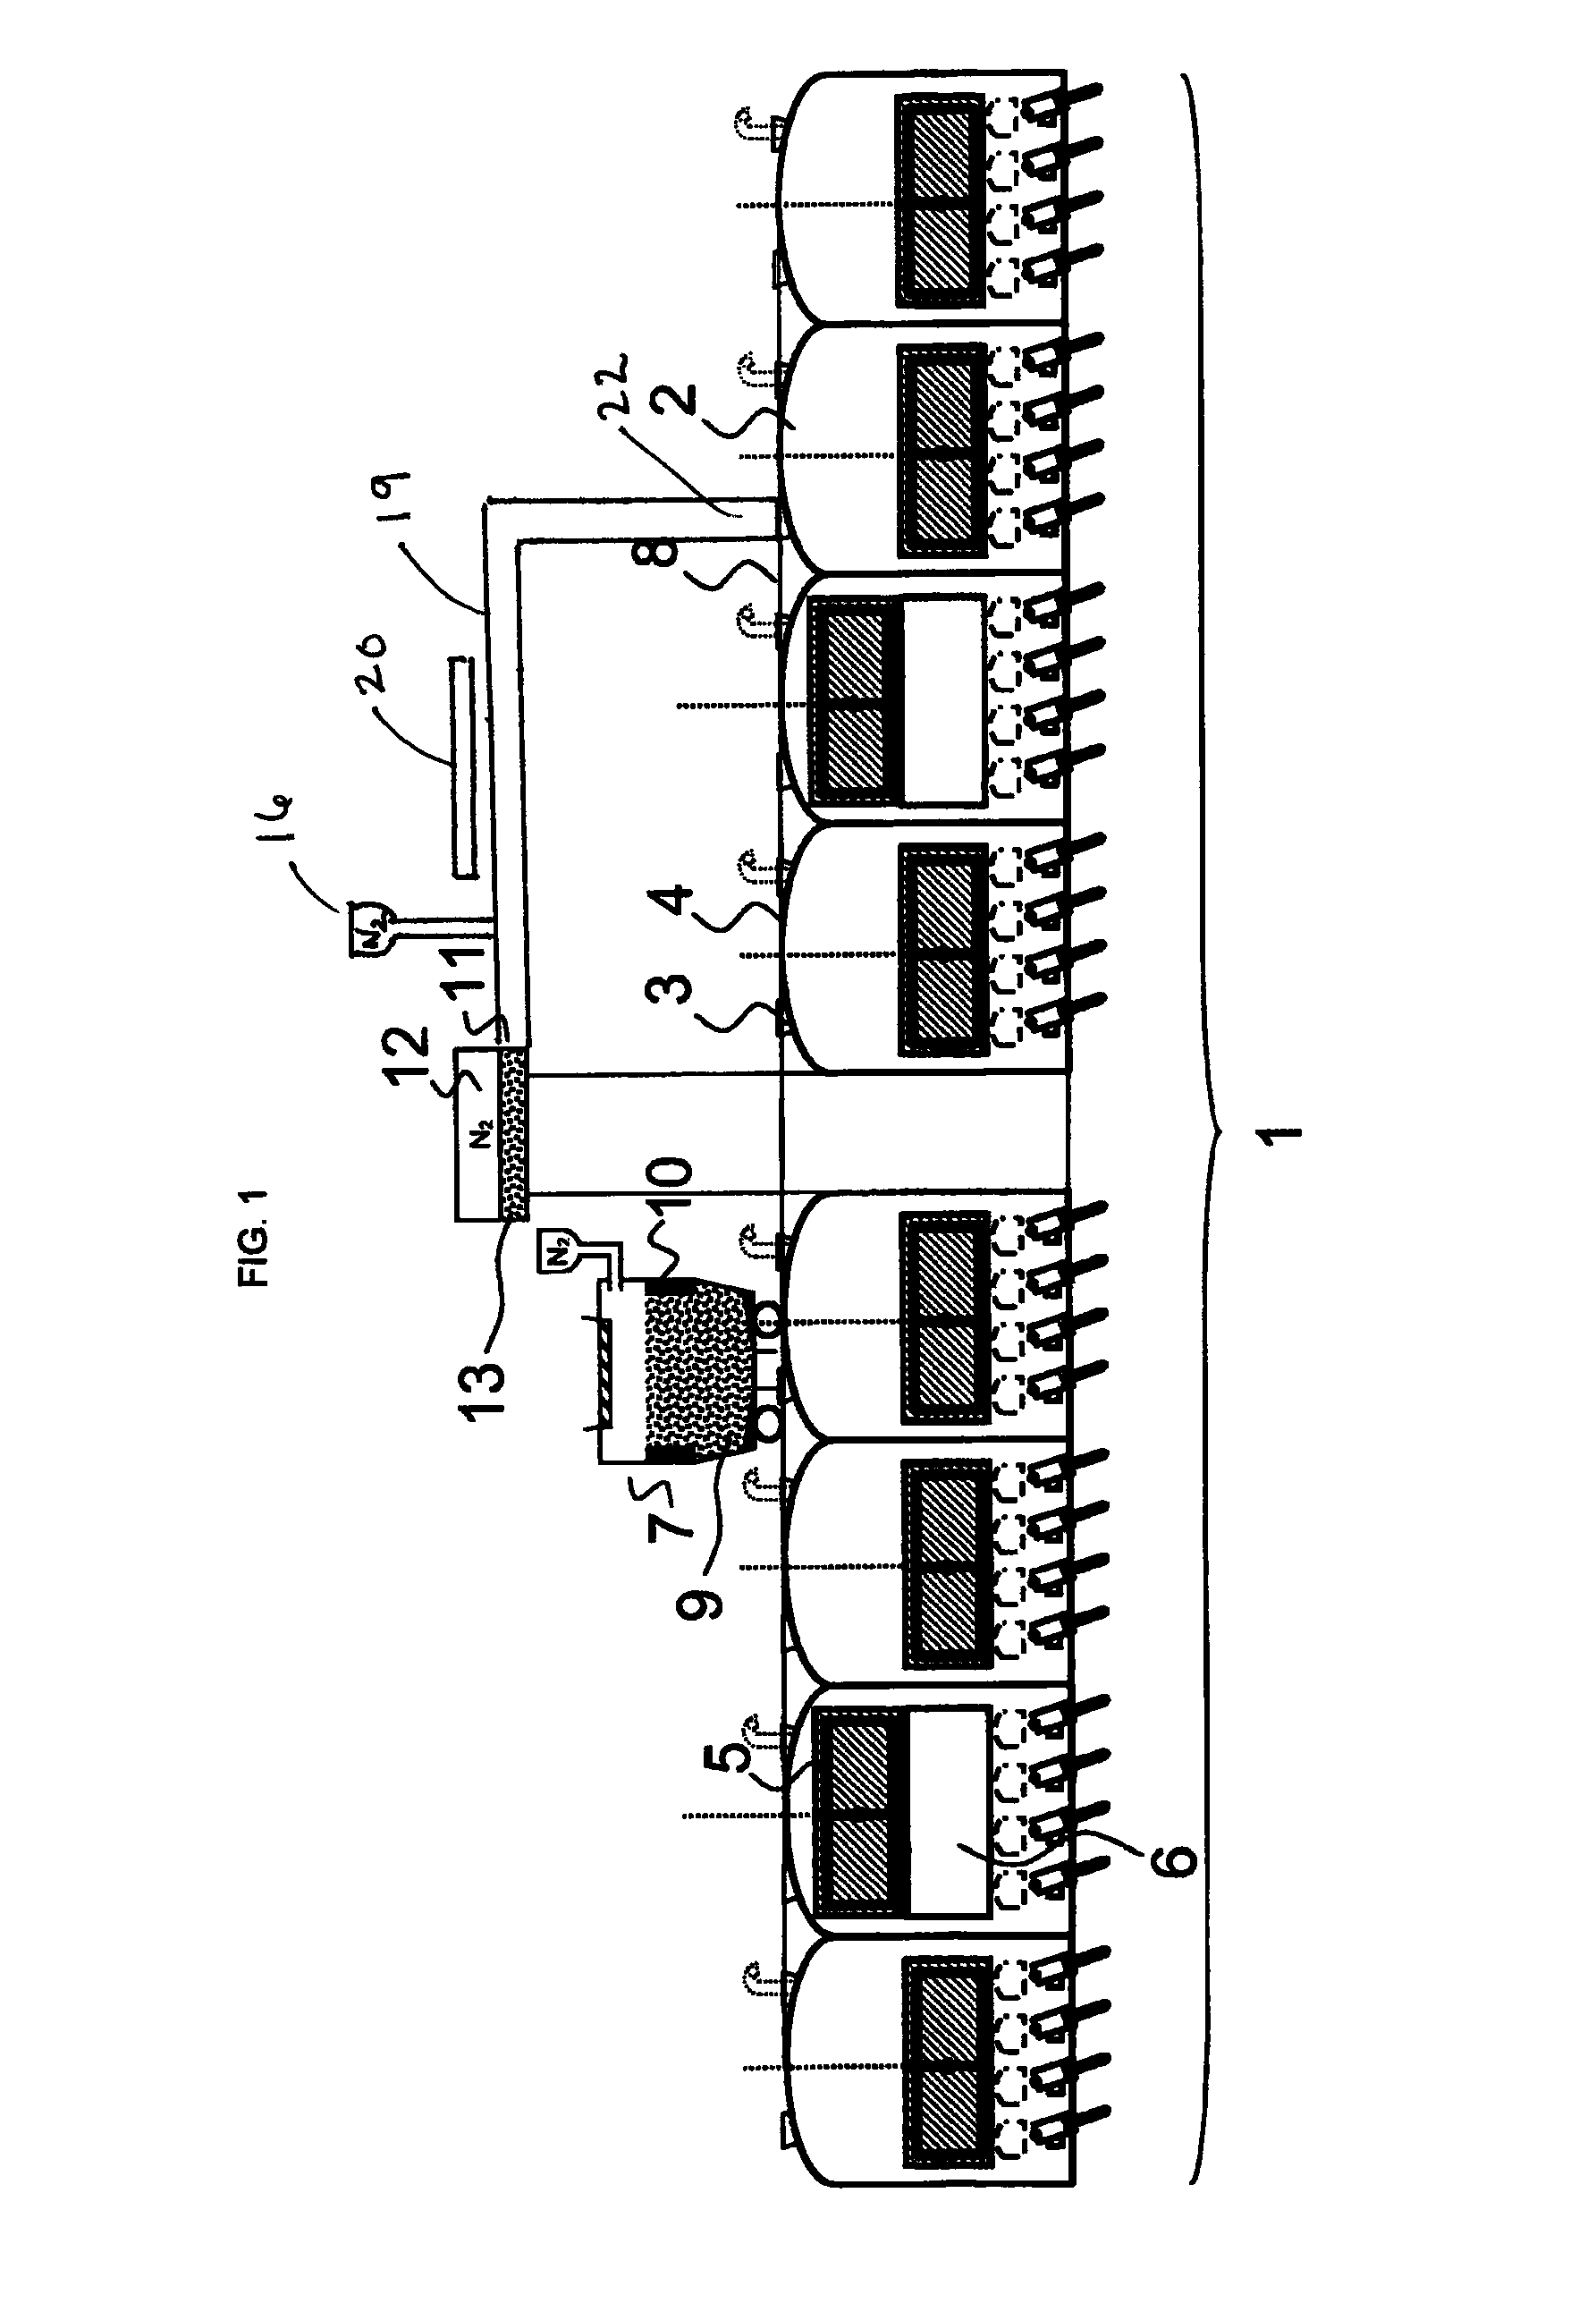 Method and device for coking coal mixtures having high driving pressure properties in a “non-recovery” or “heat-recovery” coking oven